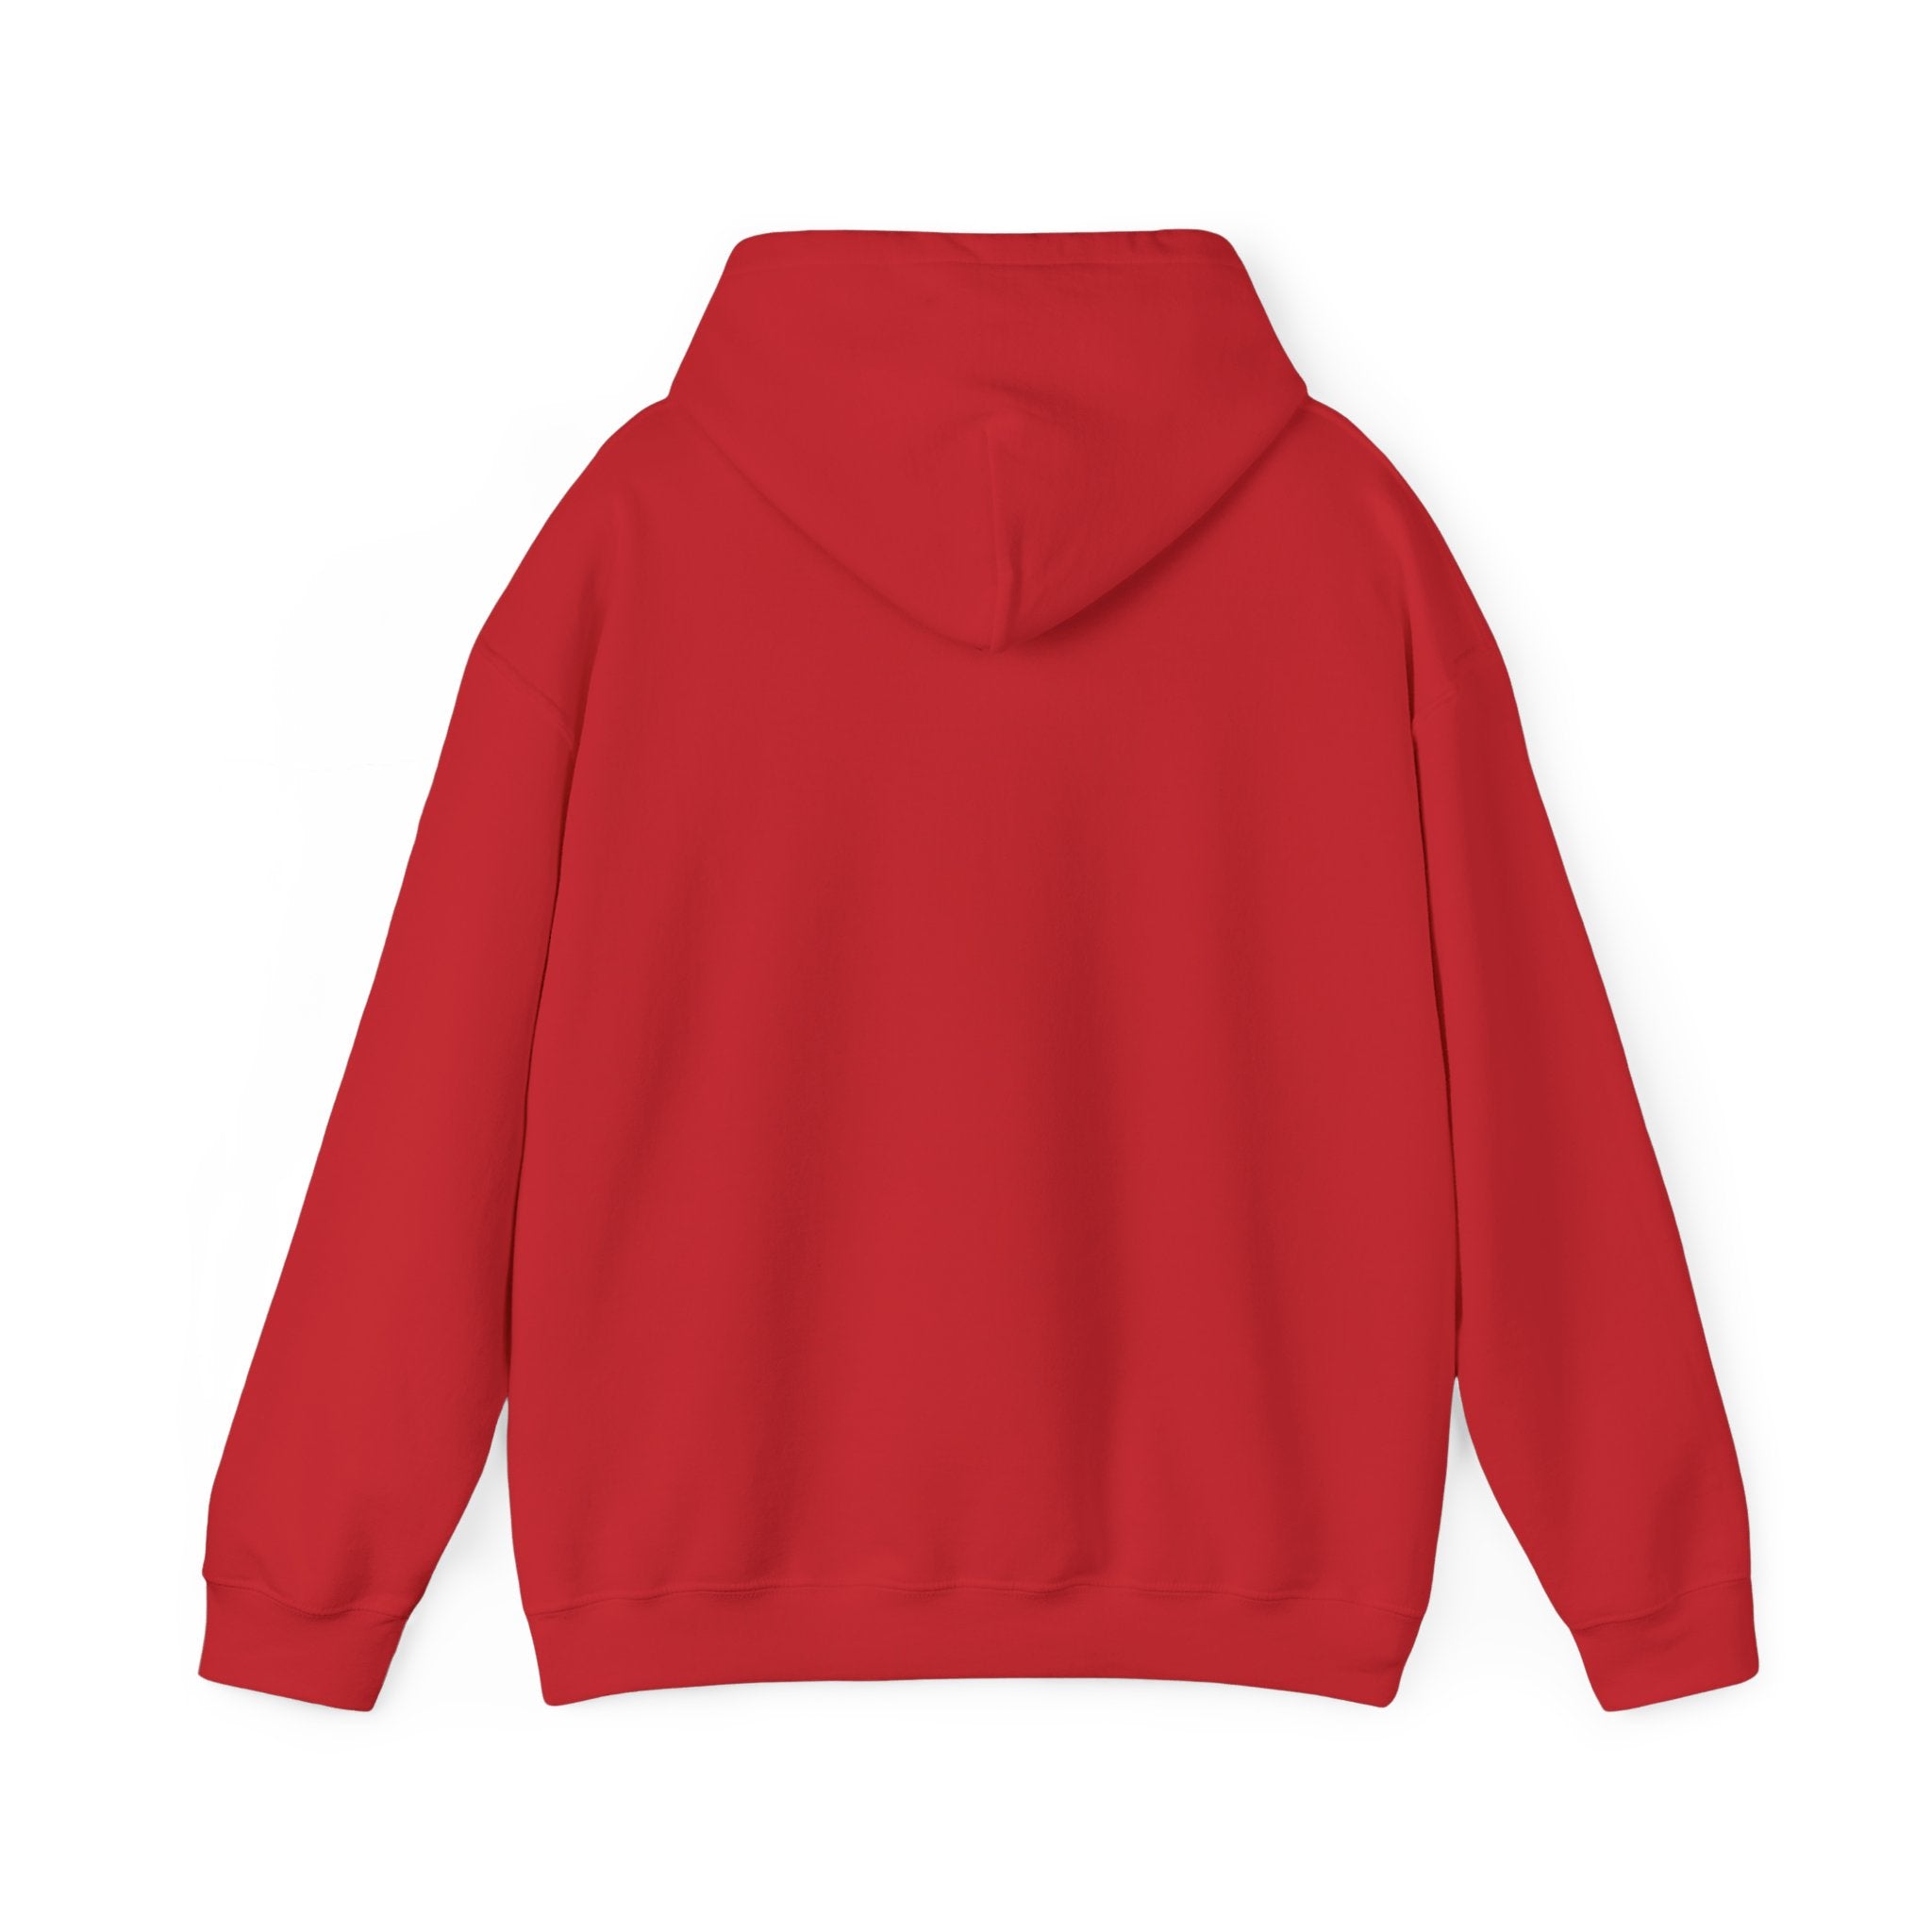 A red RU - Hooded Sweatshirt seen from the back, showcasing a plain design with an attached hood—a perfect blend of style and ultimate comfort.